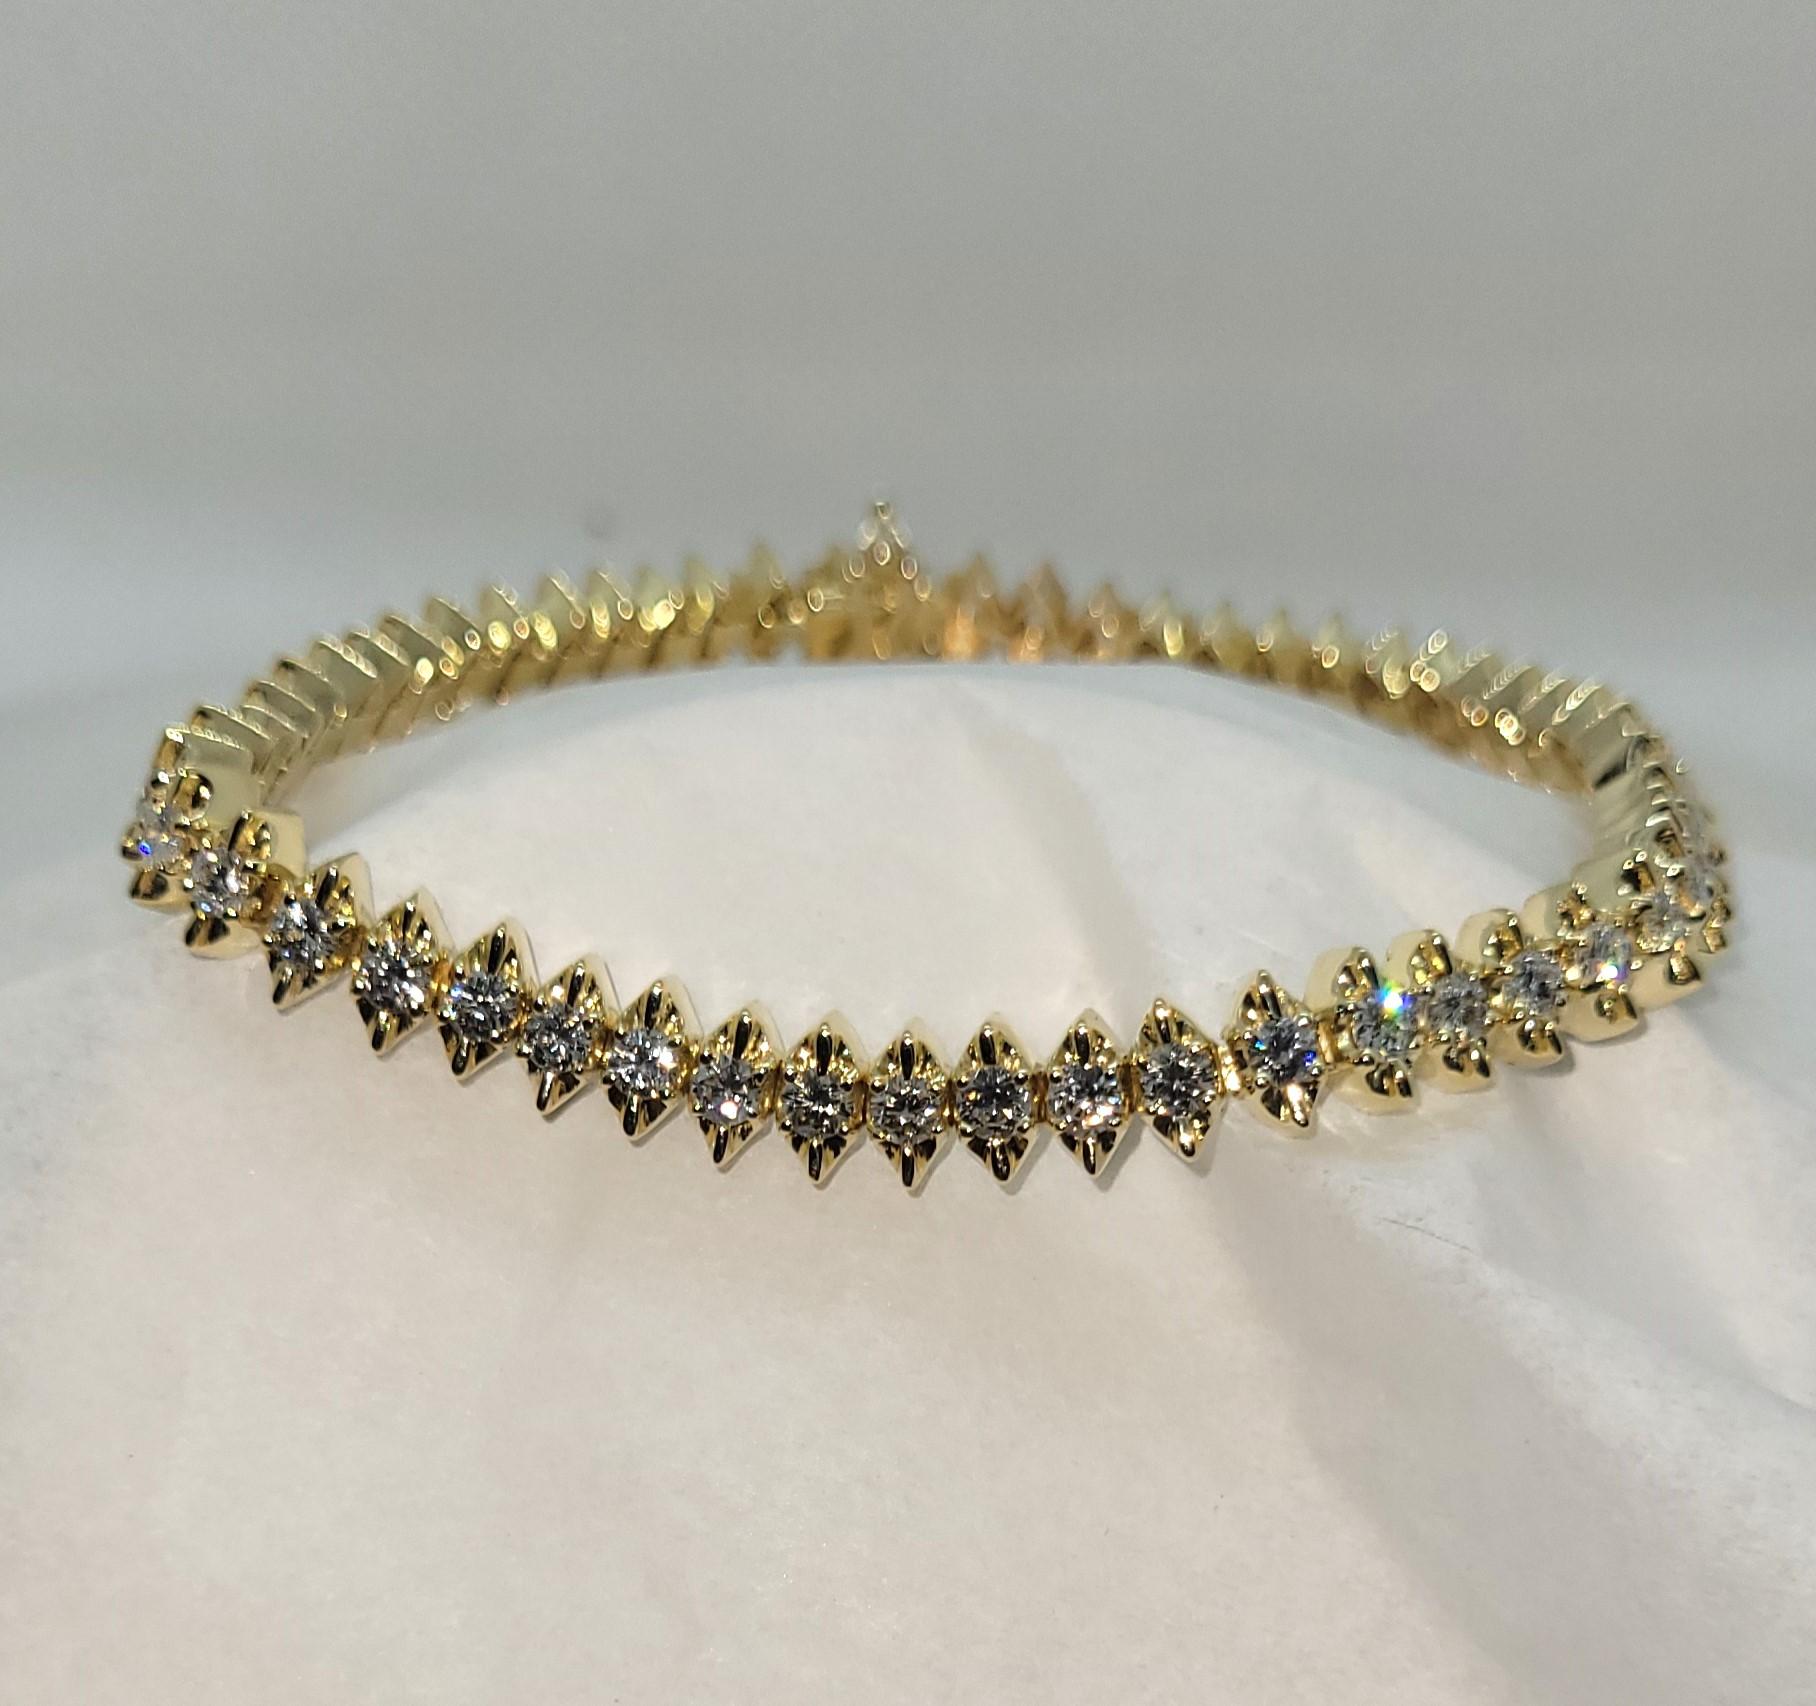 18kt Gold Round Brilliant Diamond Tennis Bracelet, 7 Inch, 4.05cttw, 24 Grams In Good Condition For Sale In Rancho Santa Fe, CA